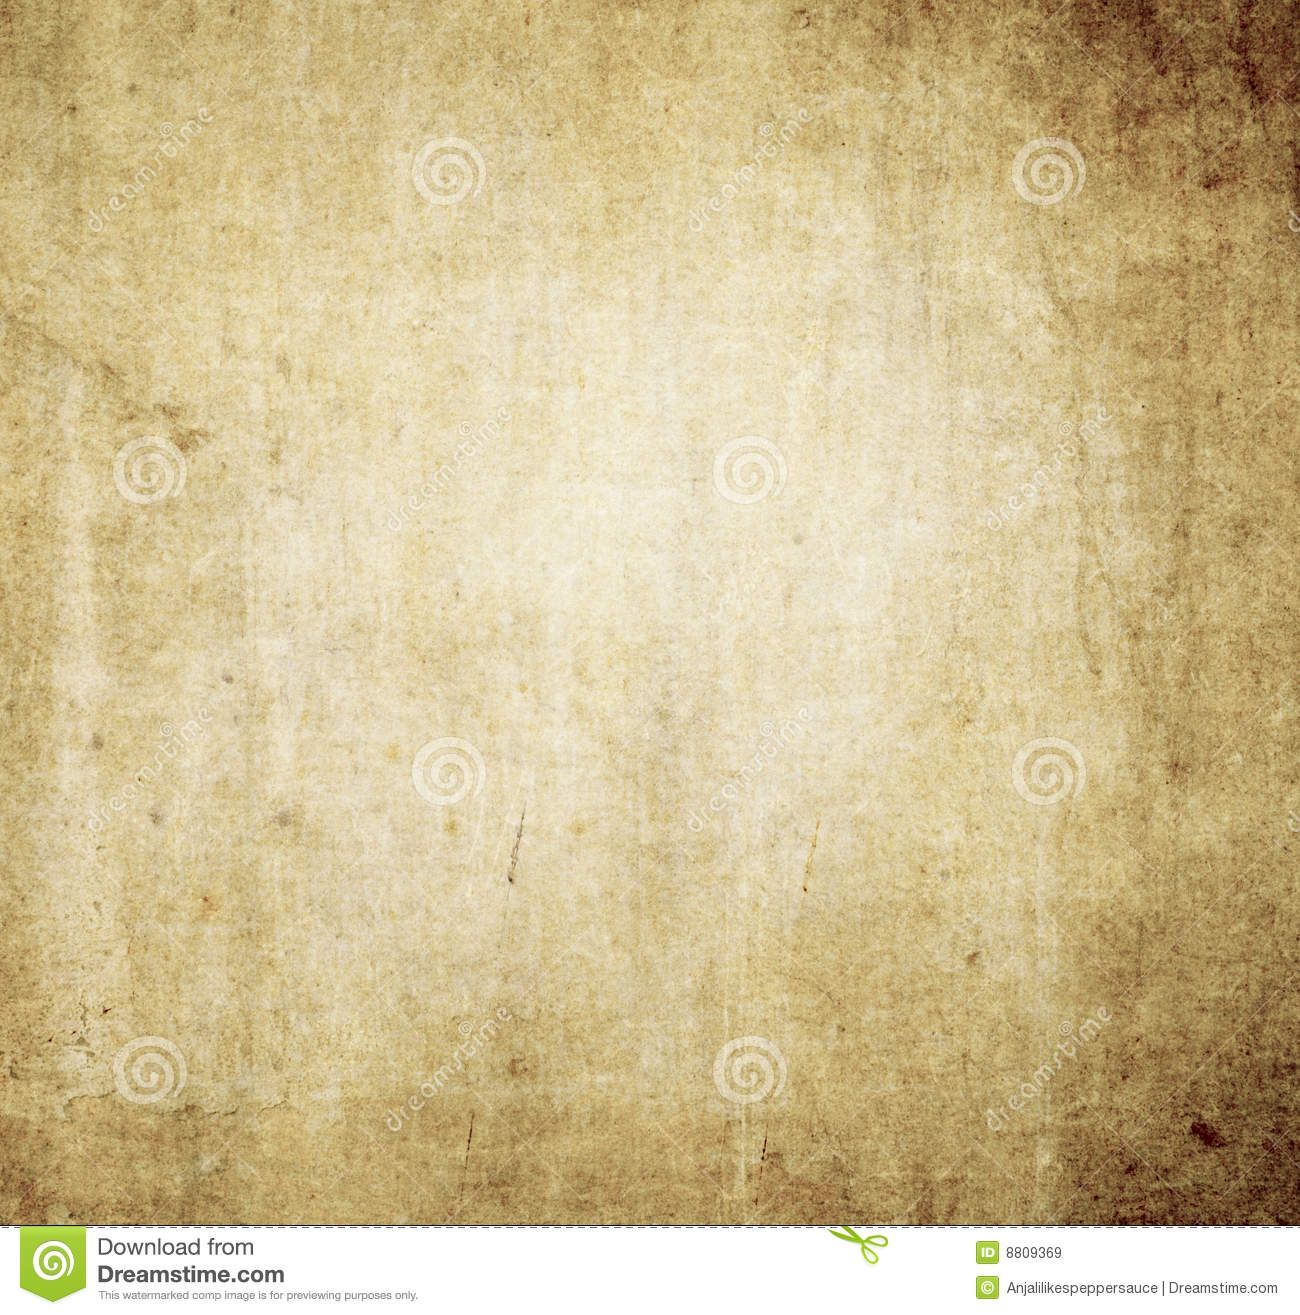 Background Image With Earthy Texture Image Stock